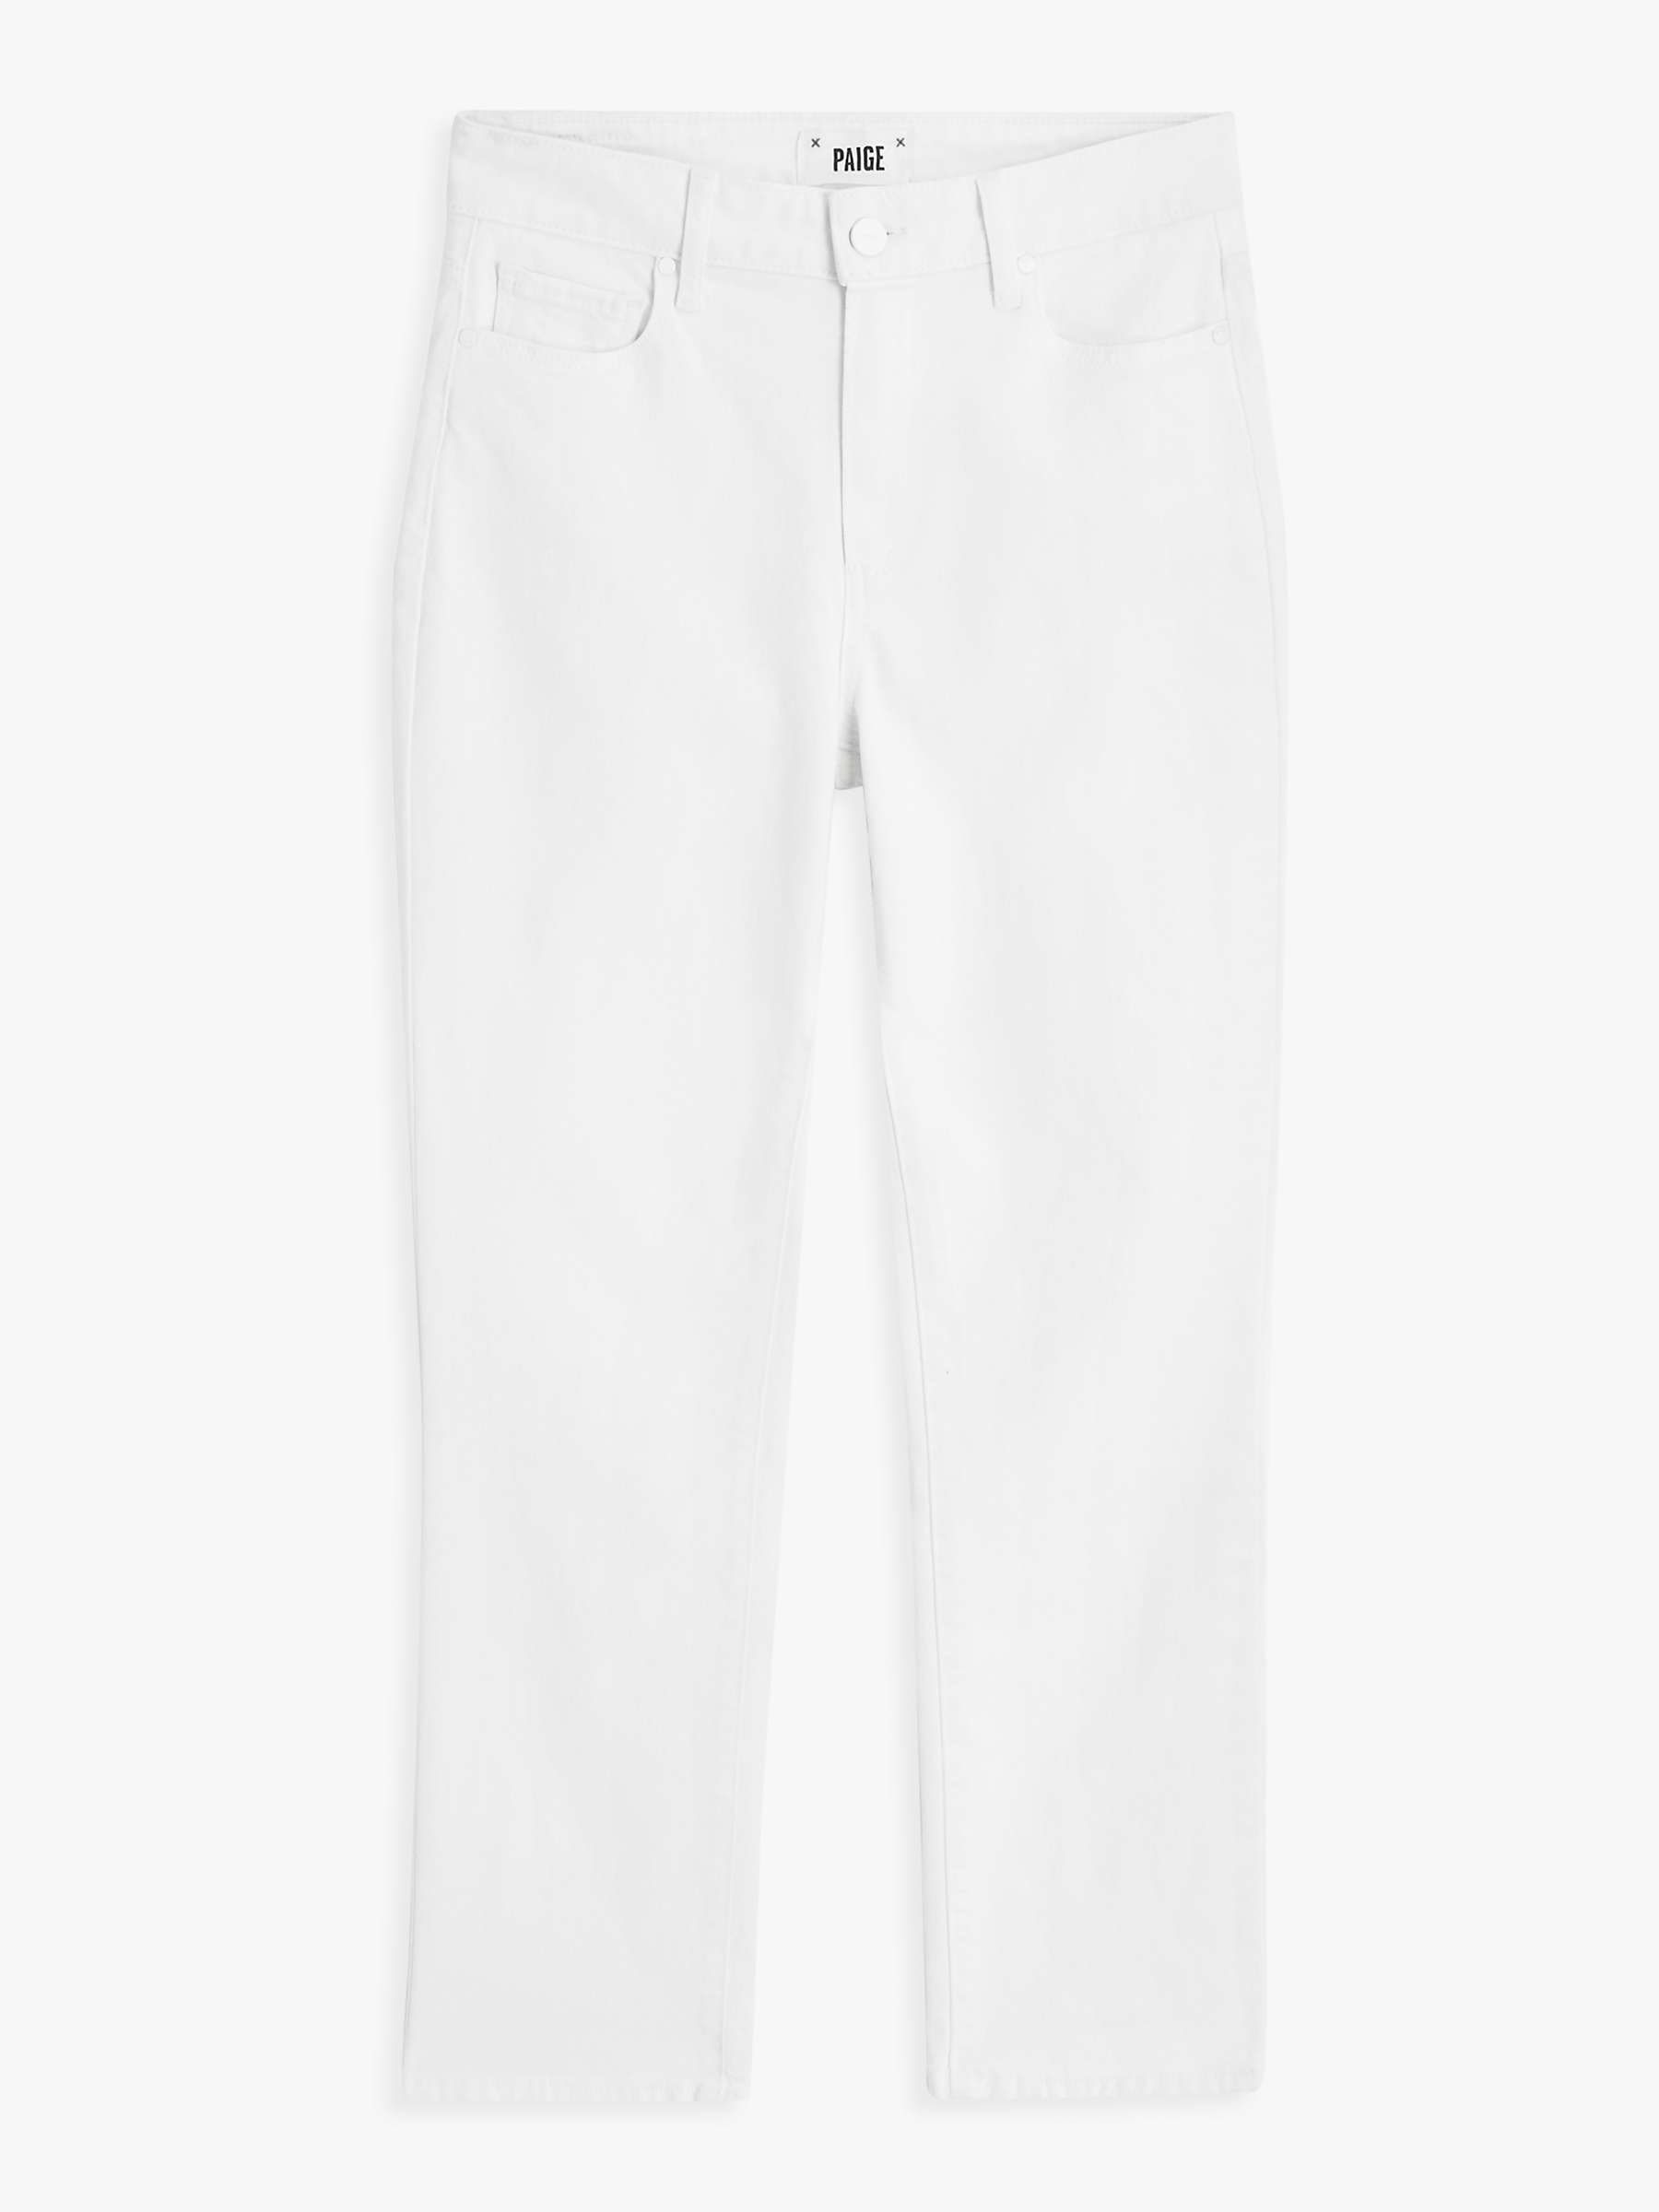 Buy PAIGE Cindy High Rise Straight Cut Jeans, Crisp White Online at johnlewis.com